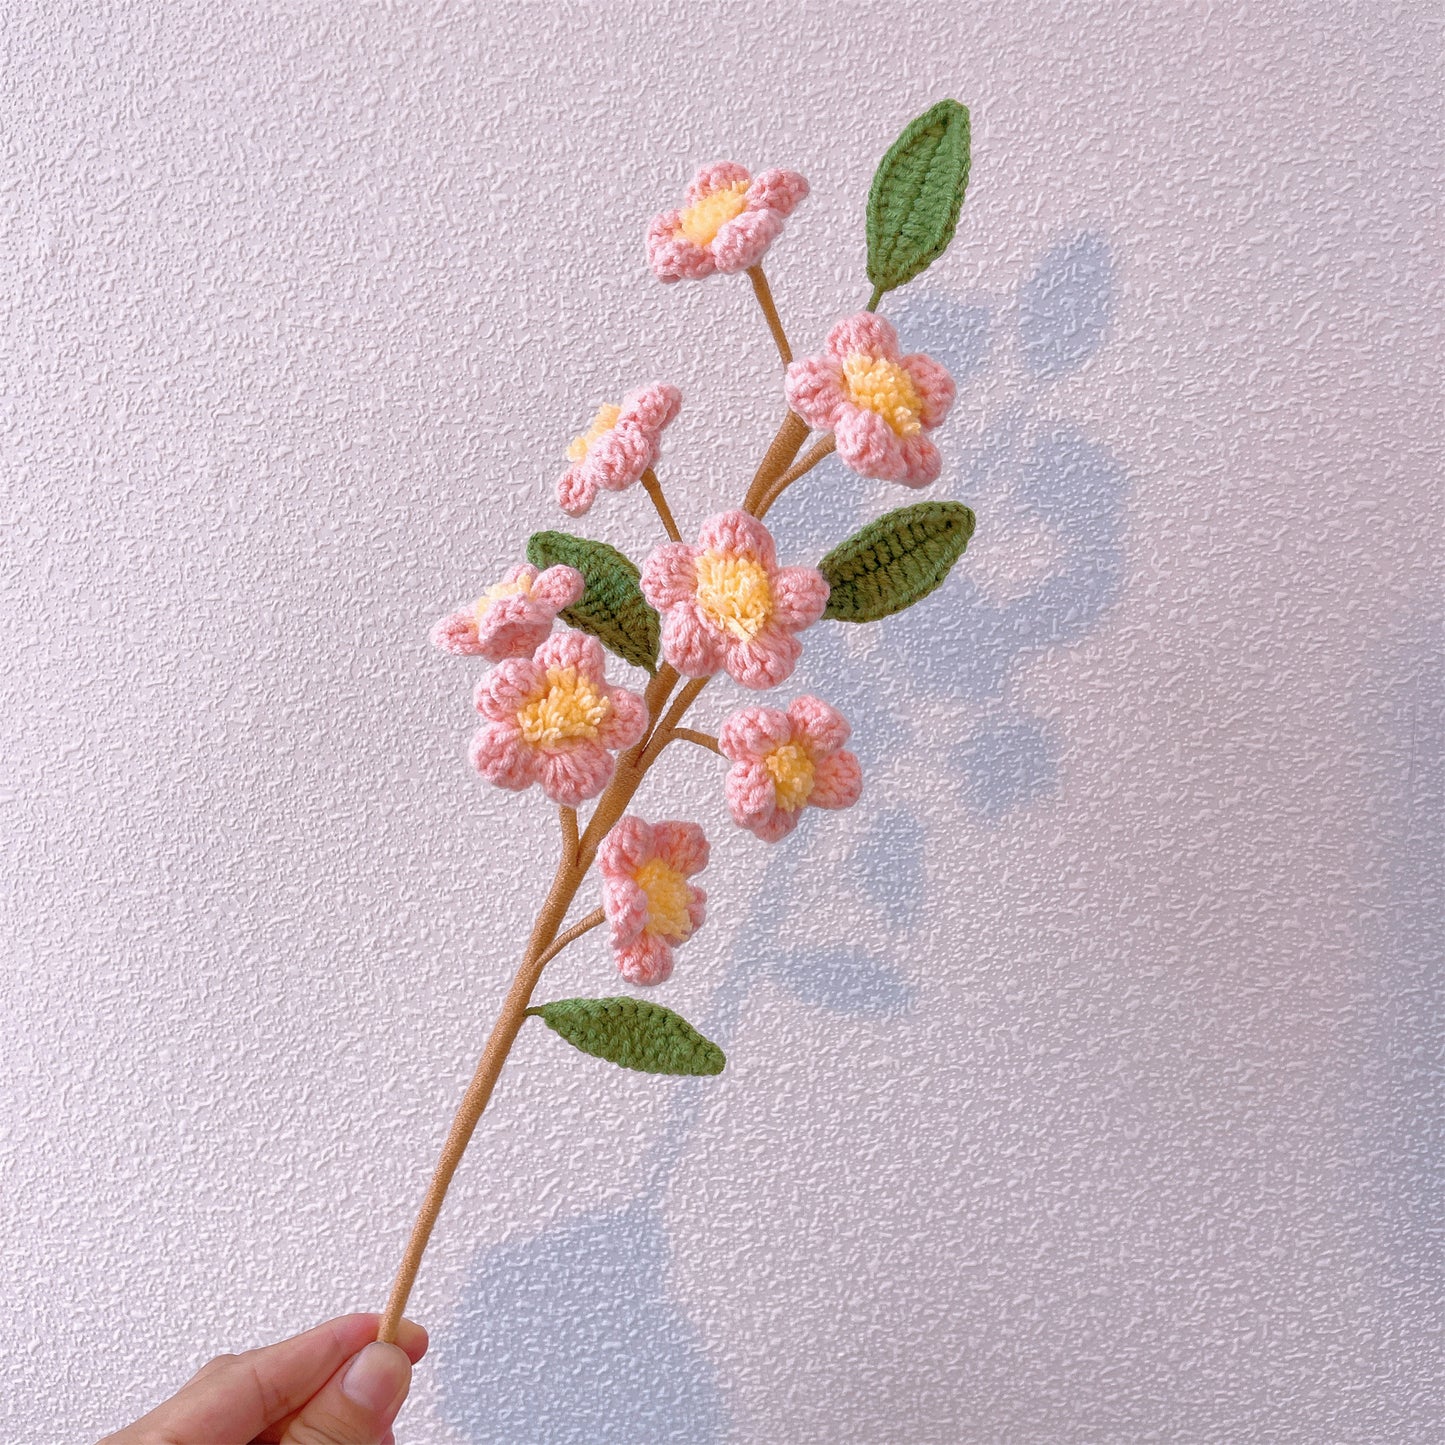 Peach Perfection: Handcrafted Crochet Peach Blossom Stake for a Beautiful Garden Decor and Meaningful Gift